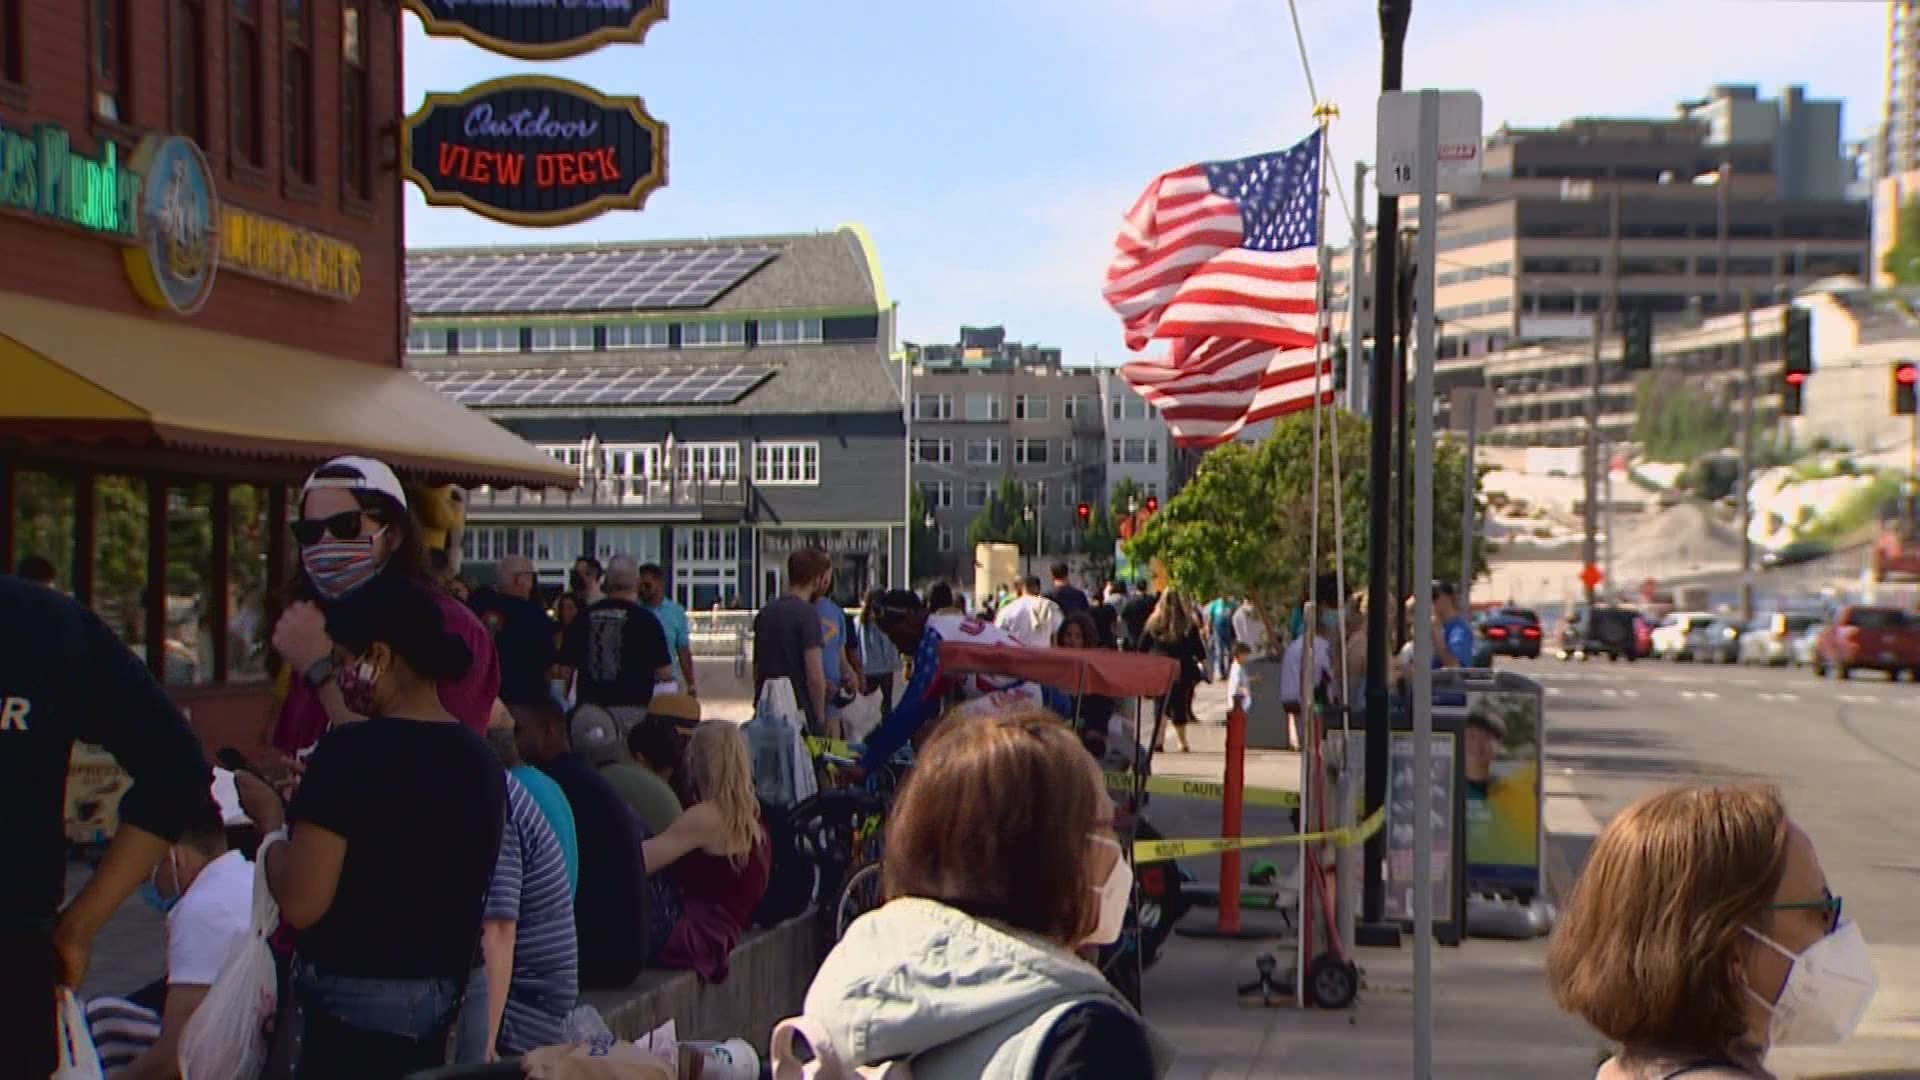 Restaurants, attractions and the piers were filled with people and tourists for long Memorial Day weekend.